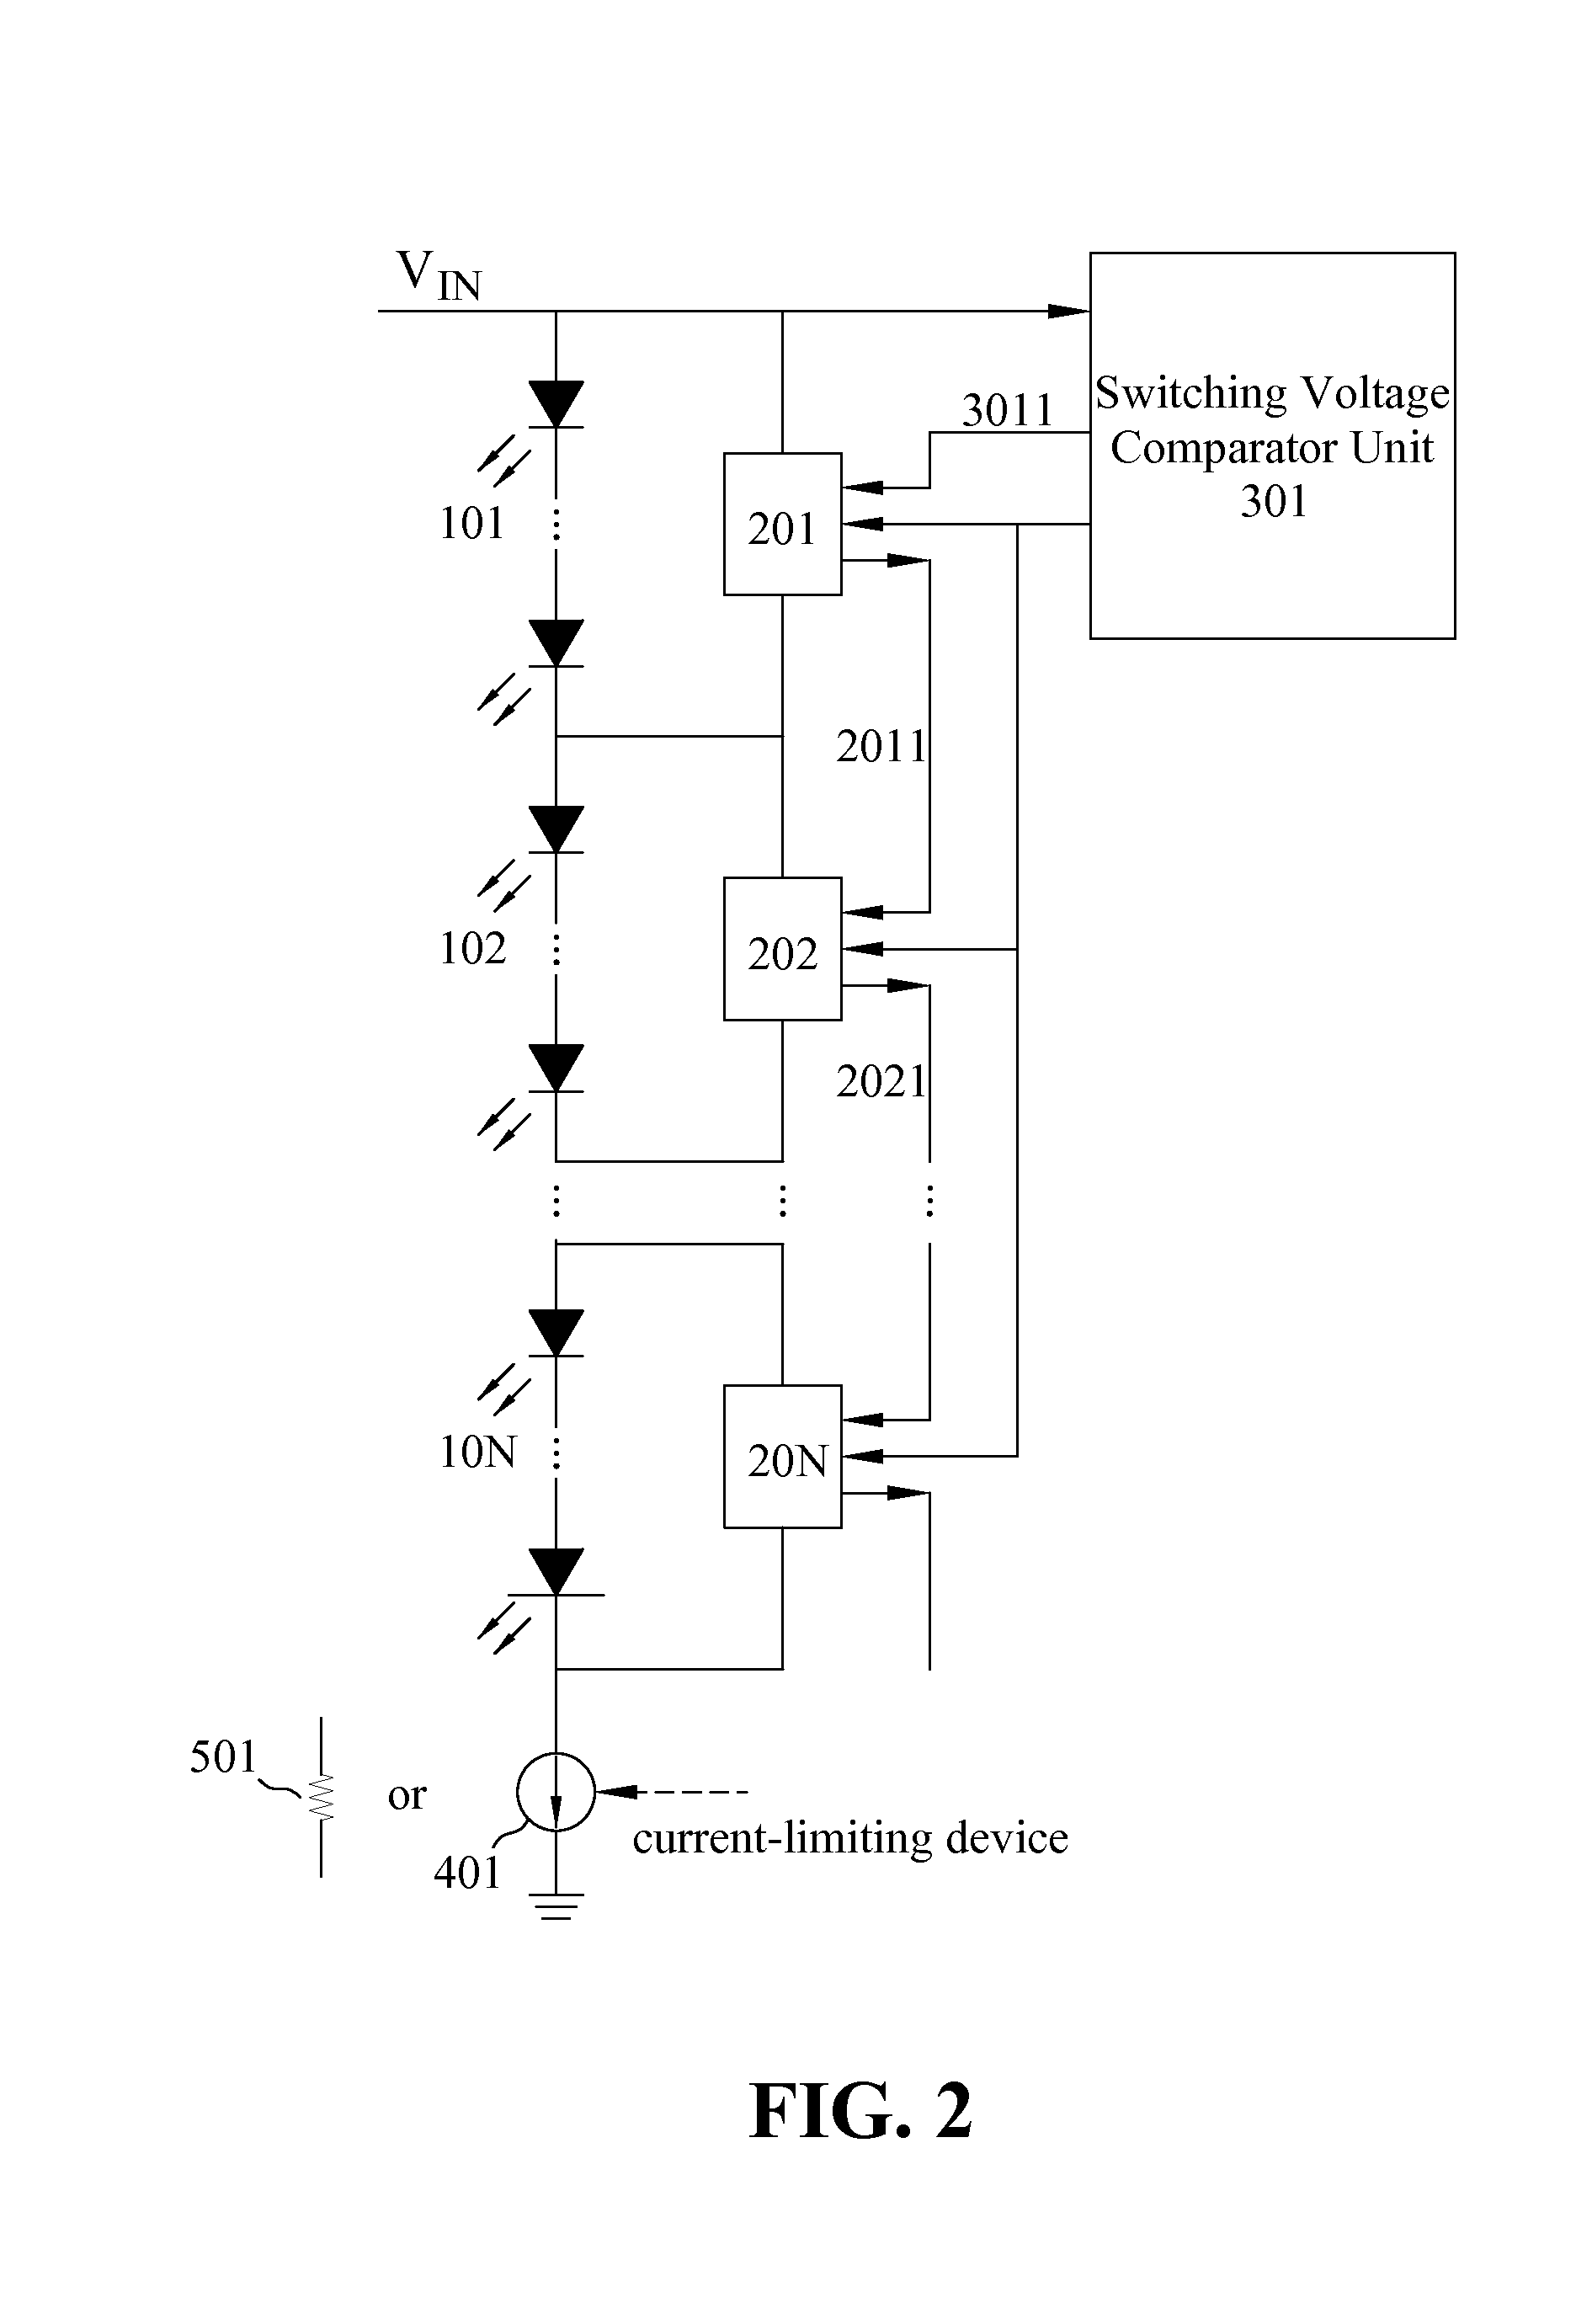 Apparatus for driving a plurality of segments of led-based lighting units